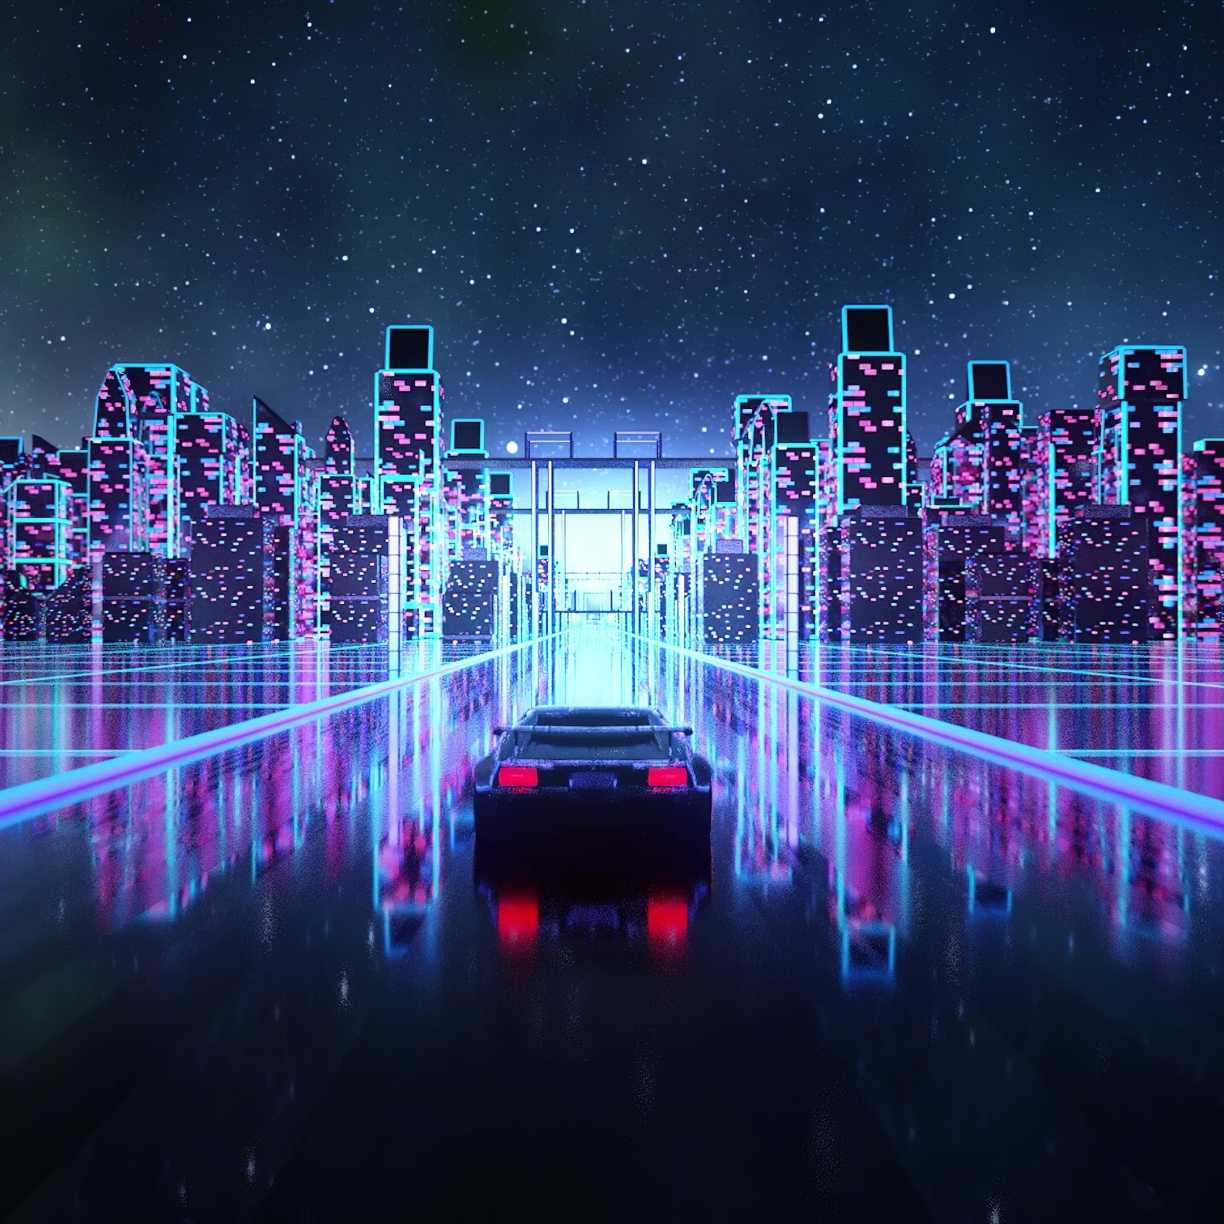 Cyberpunk Outrun Vaporwave Car On Road Art Wallpaper Hd Image Picture Background 95ddb8 Wallpapersmug